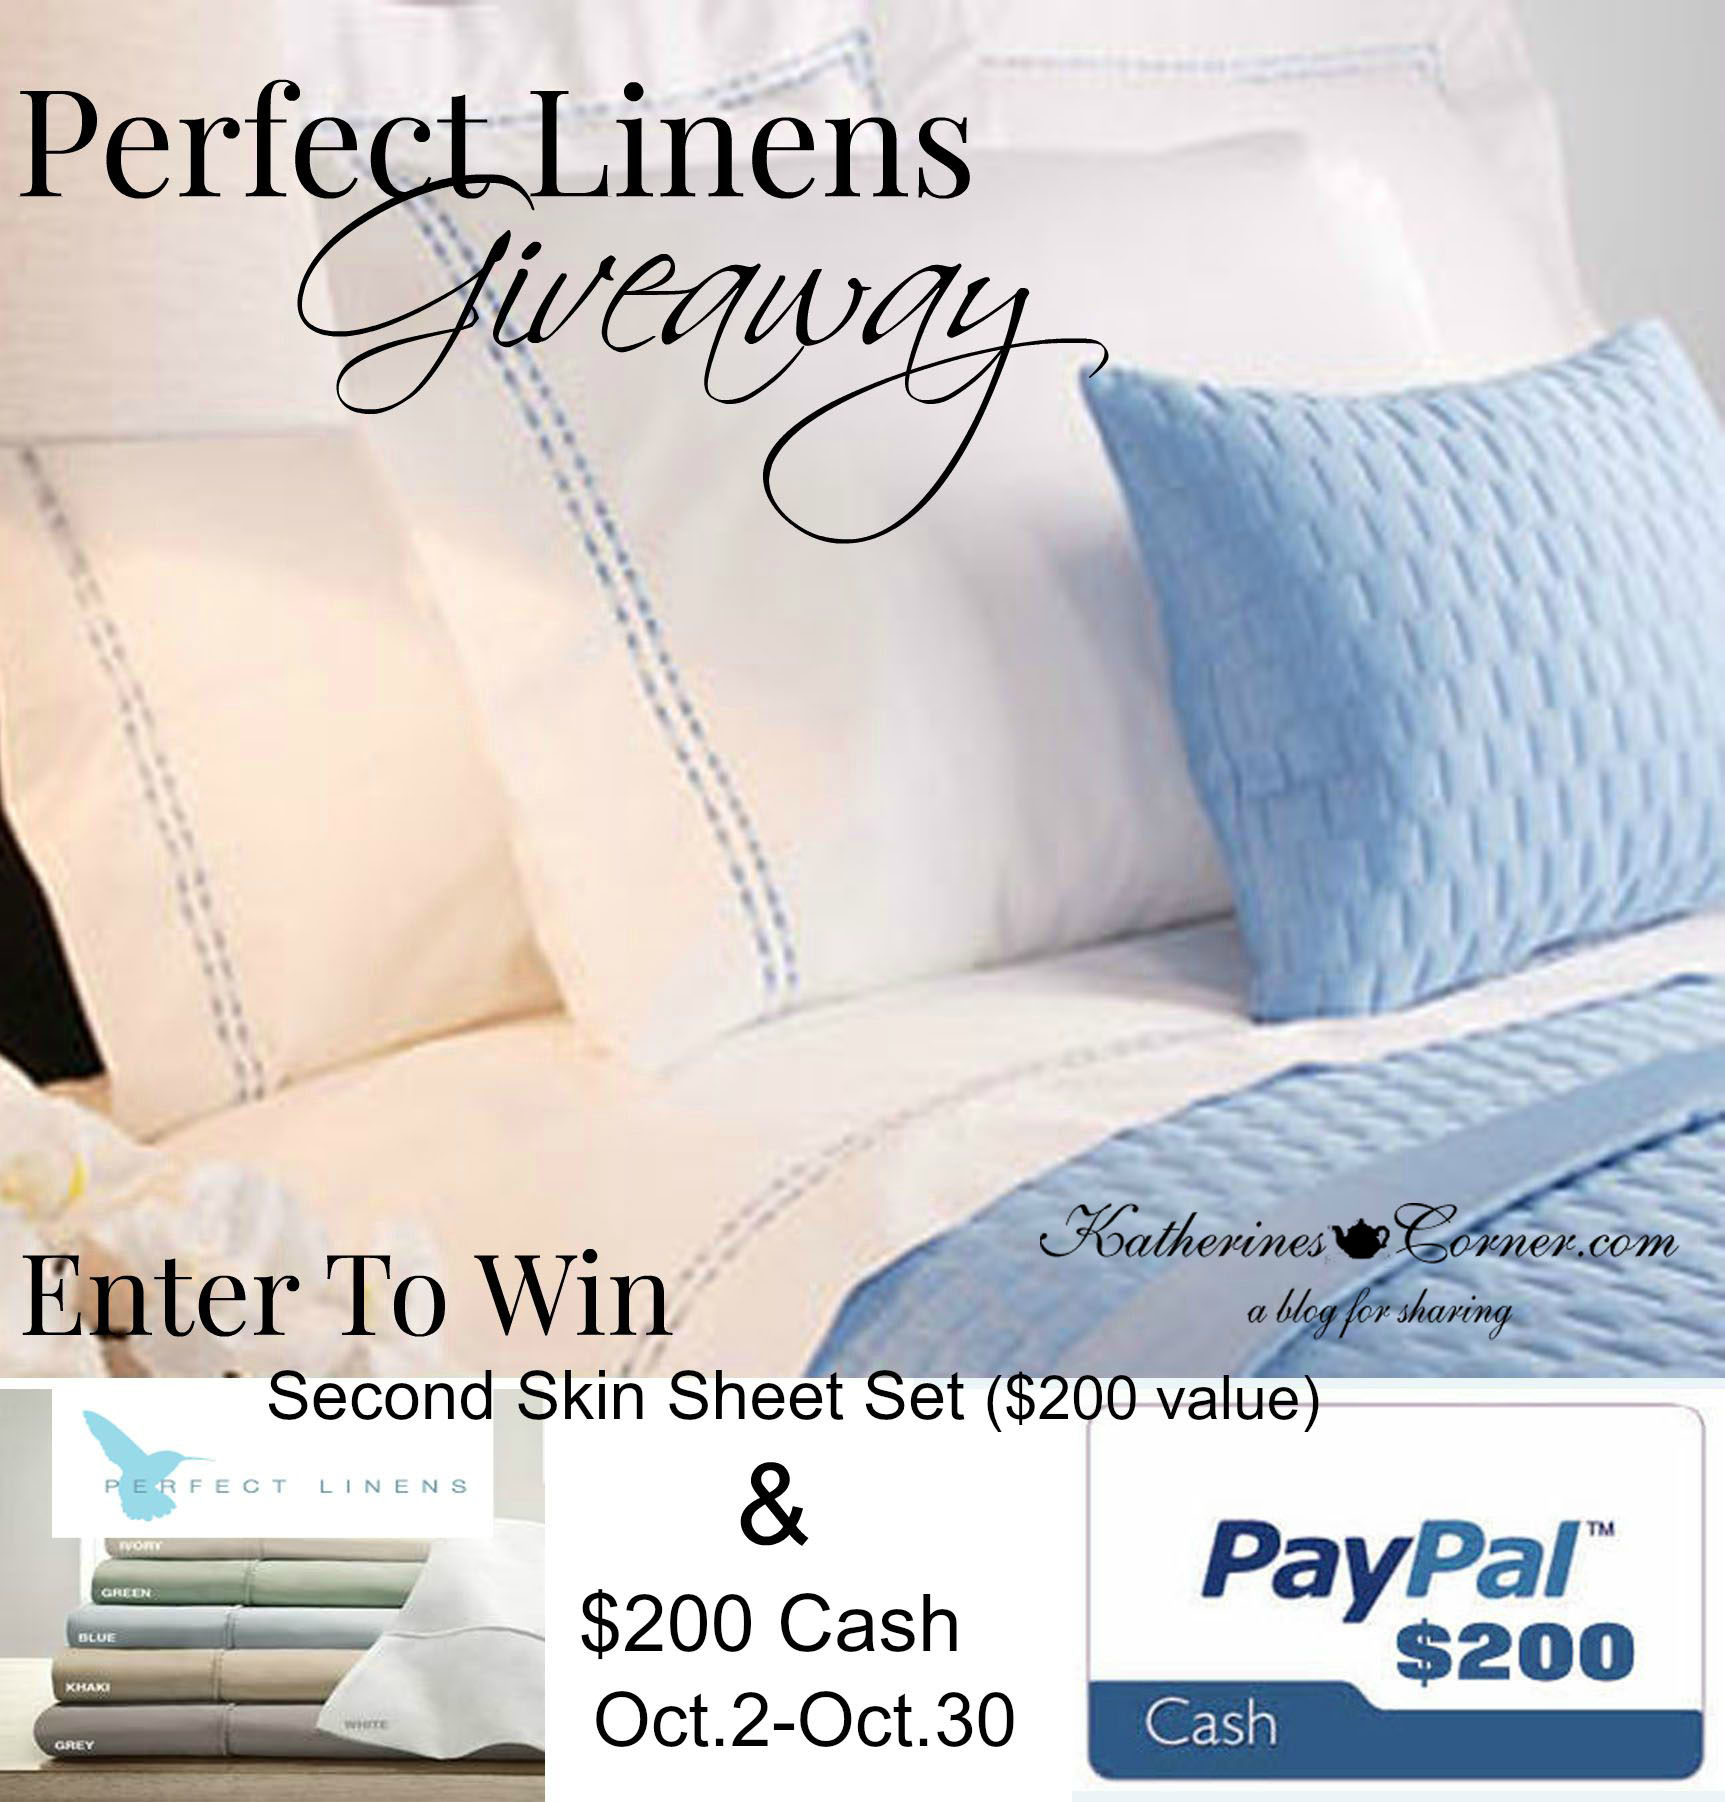 Perfect Linens Giveaway